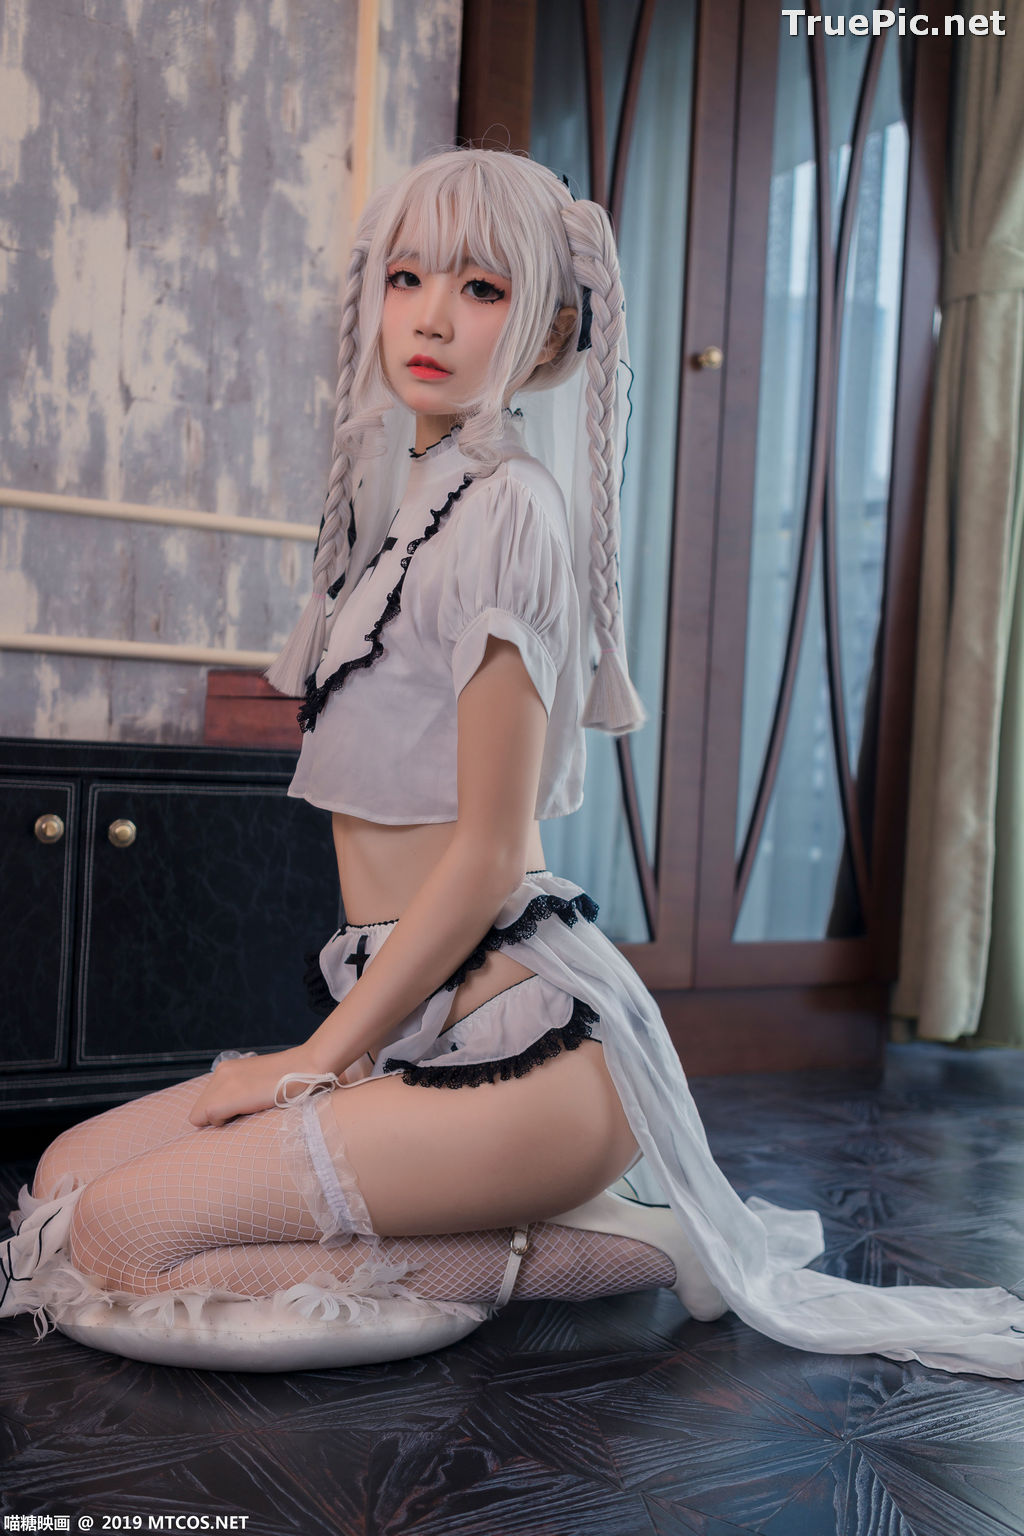 Image [MTCos] 喵糖映画 Vol.035 – Chinese Cute Model – The White Angel - TruePic.net - Picture-10